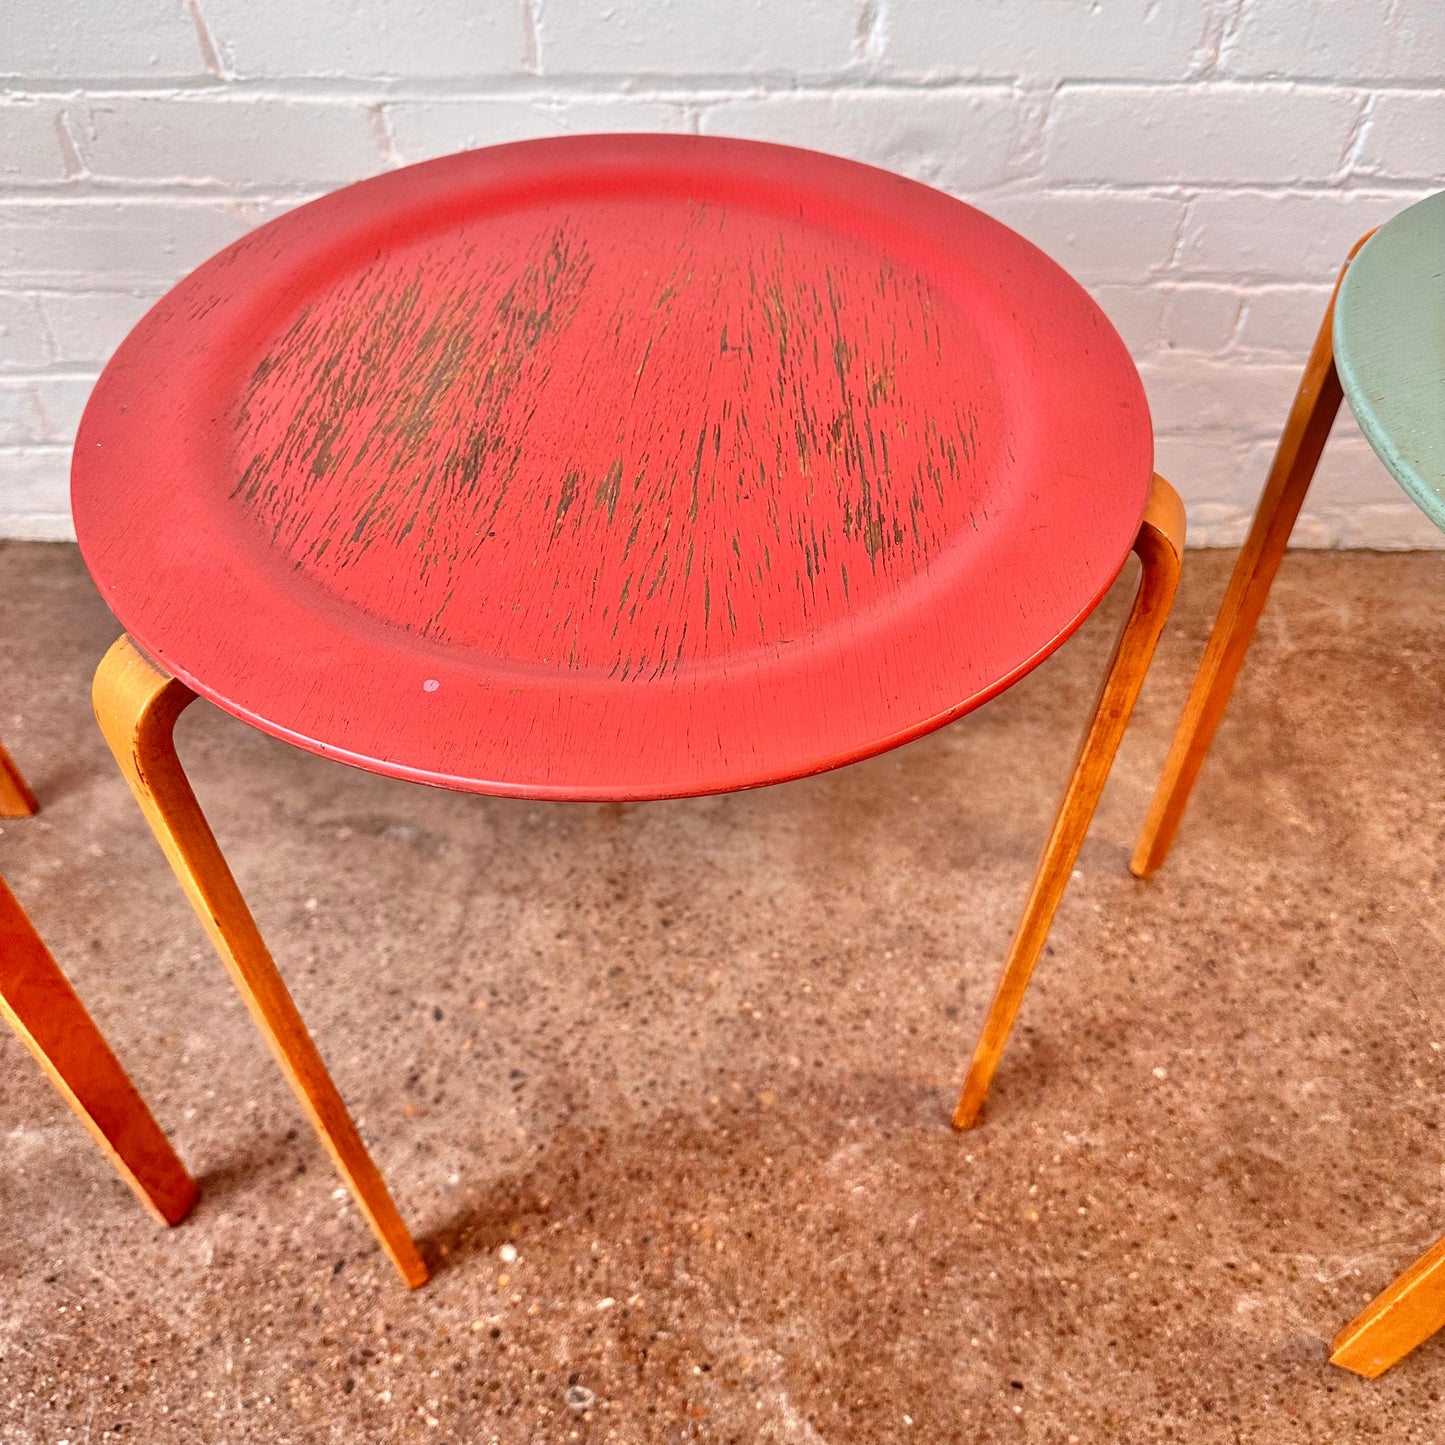 SET OF 3 STACKING TABLES BY BODAFORS, 1950S